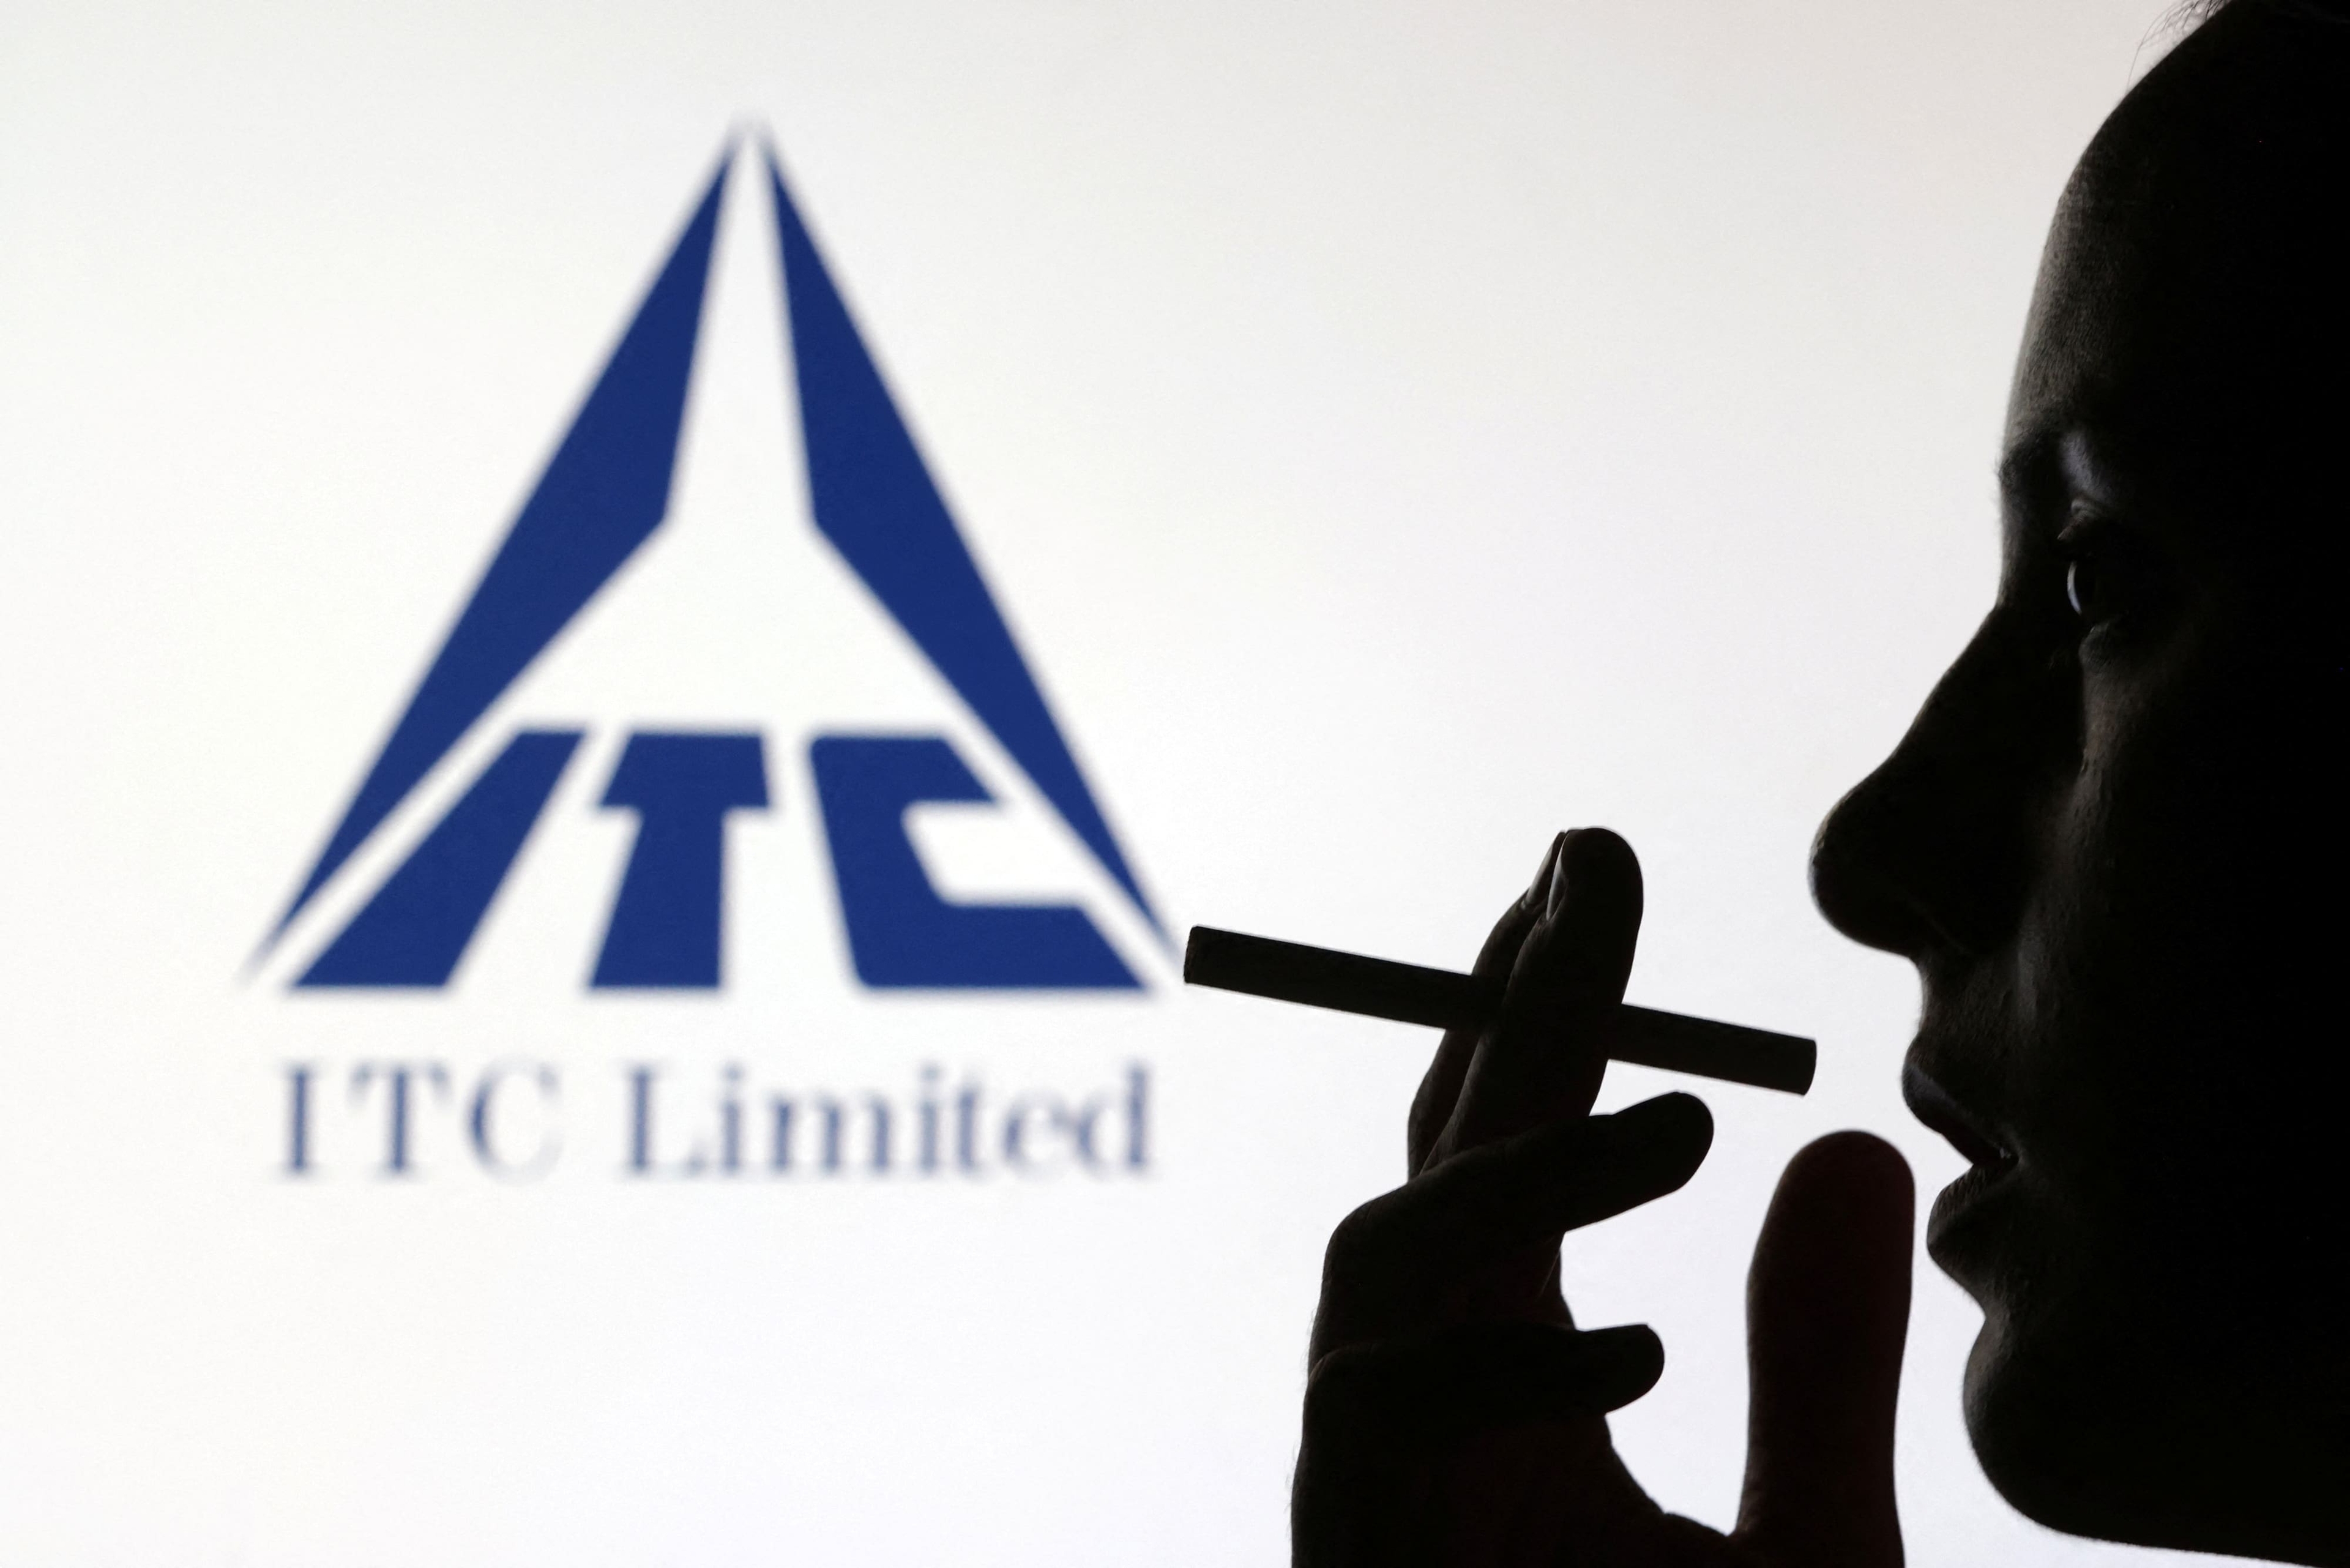 ITC has also strengthened its product portfolio with new launches and premiumisation across segments.